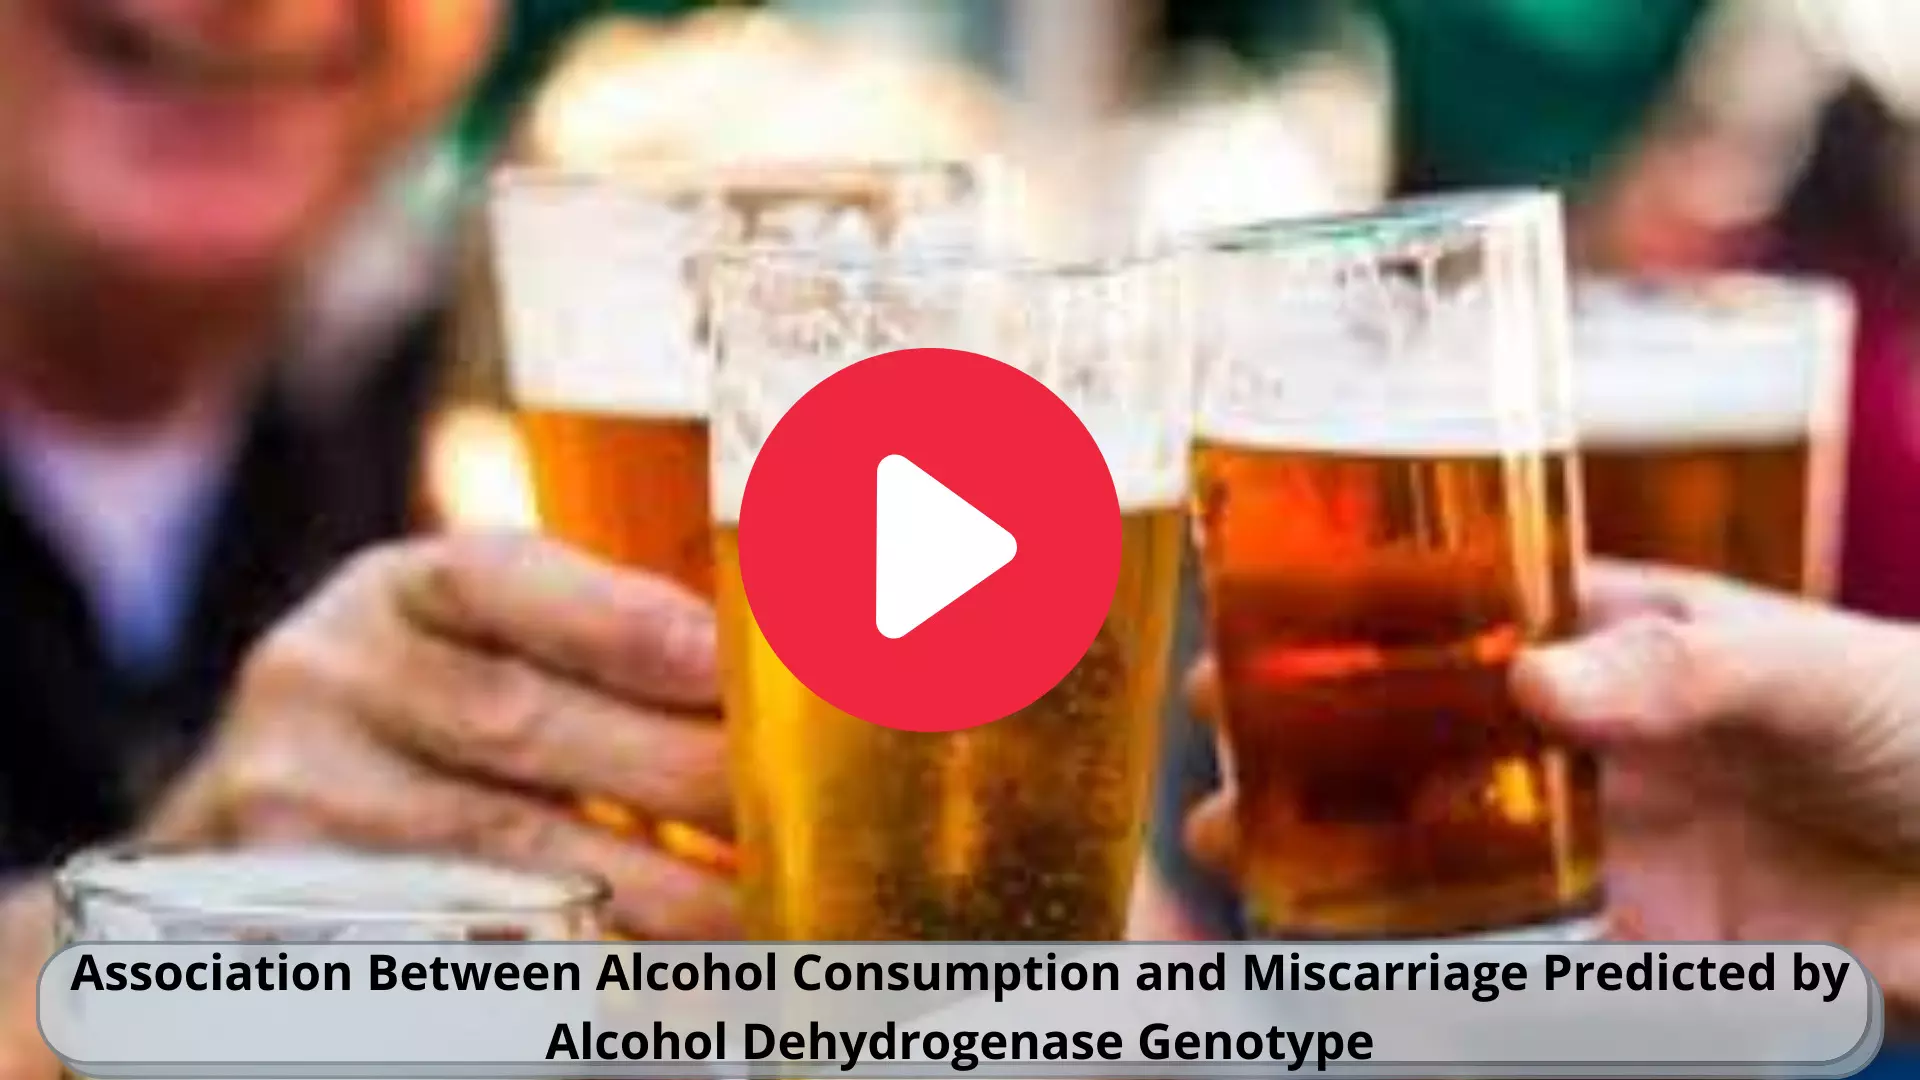 Association Between Alcohol Consumption and Miscarriage Predicted by Genotype